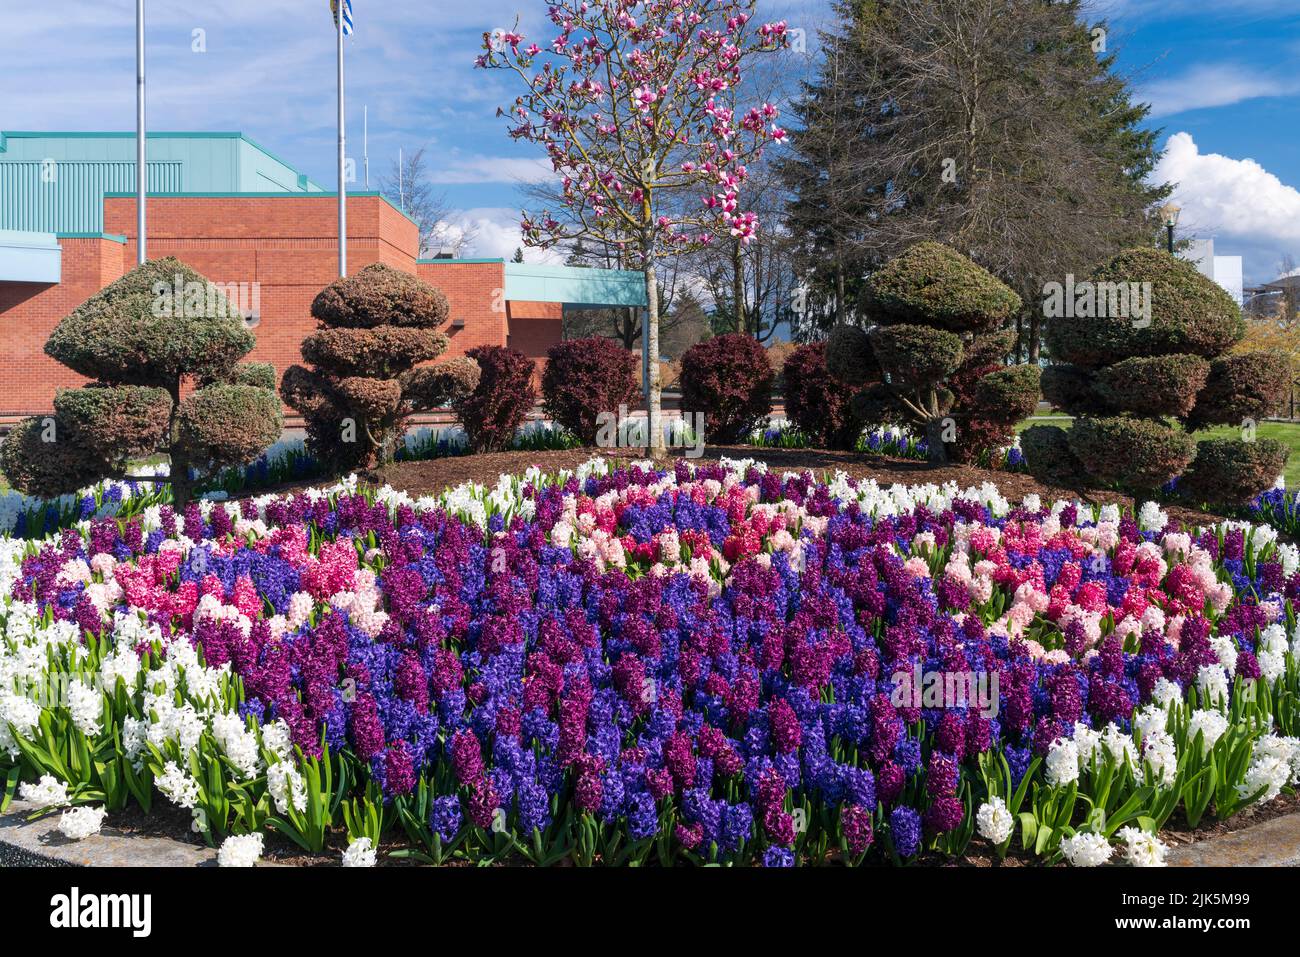 A hyacinth decorative flower bed at city Hall in Abbotsford, British Columbia, Canada. Stock Photo